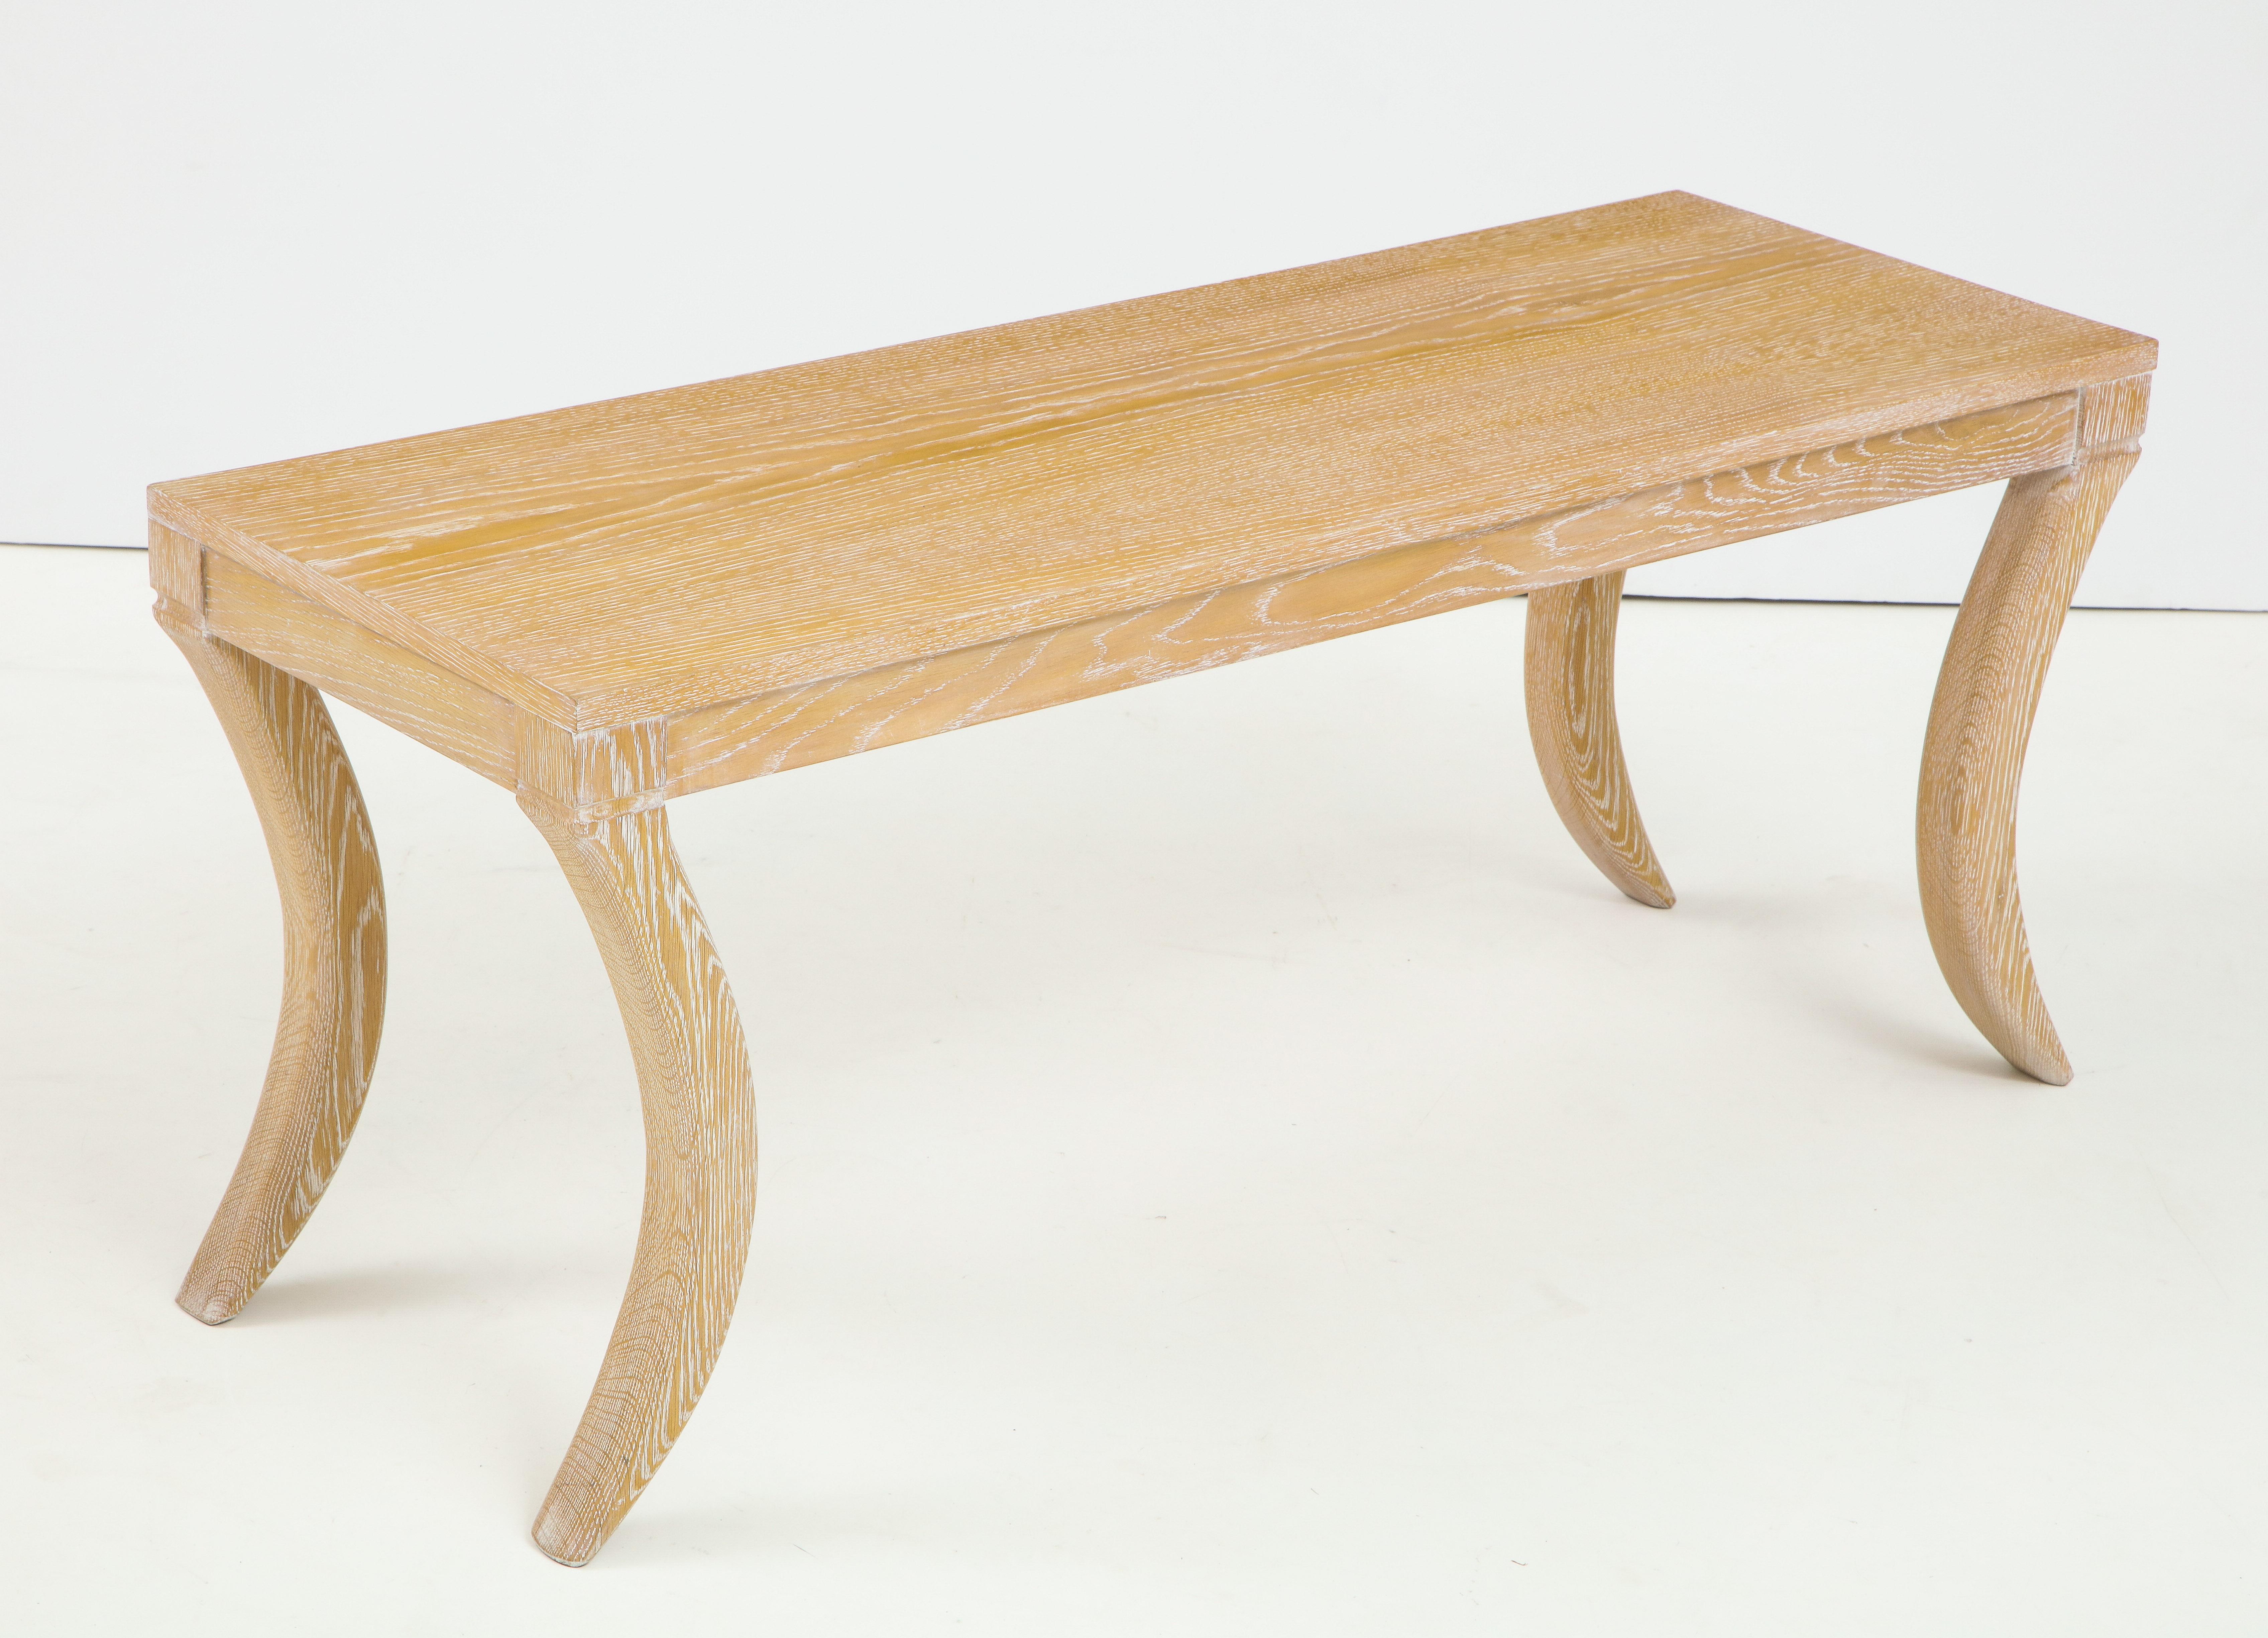 Custom cerused oak bench/cocktail table on sabre legs. Please note that this item is customizable. It can be crafted in a variety of woods and finishes.
Lead Time is 8-10 weeks.  One table is currently in stock.